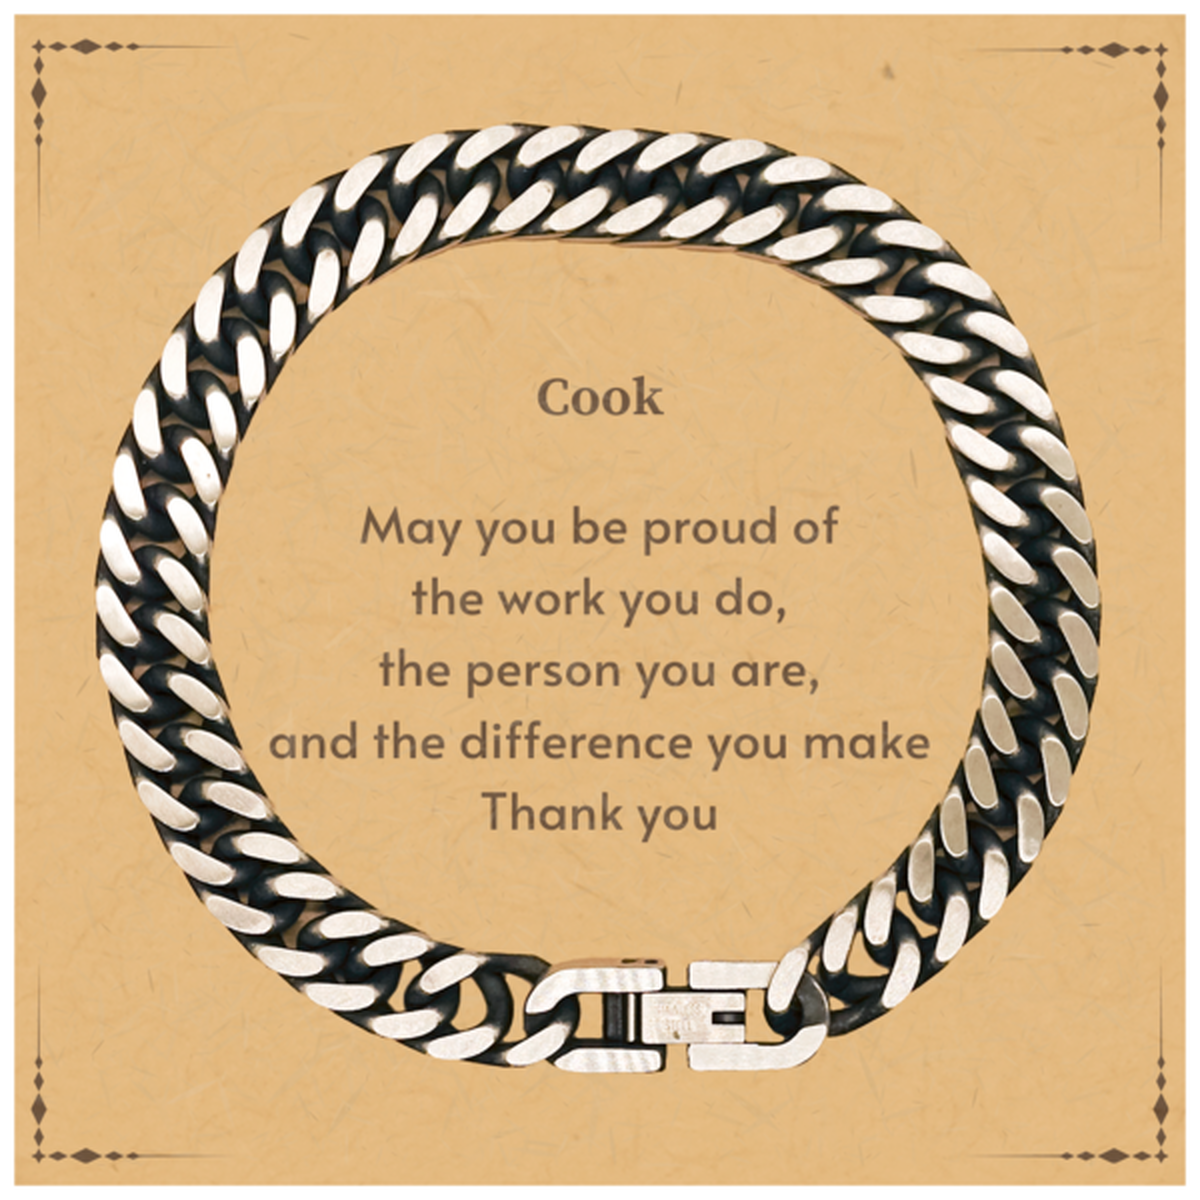 Heartwarming Cuban Link Chain Bracelet Retirement Coworkers Gifts for Cook, Cook May You be proud of the work you do, the person you are Gifts for Boss Men Women Friends